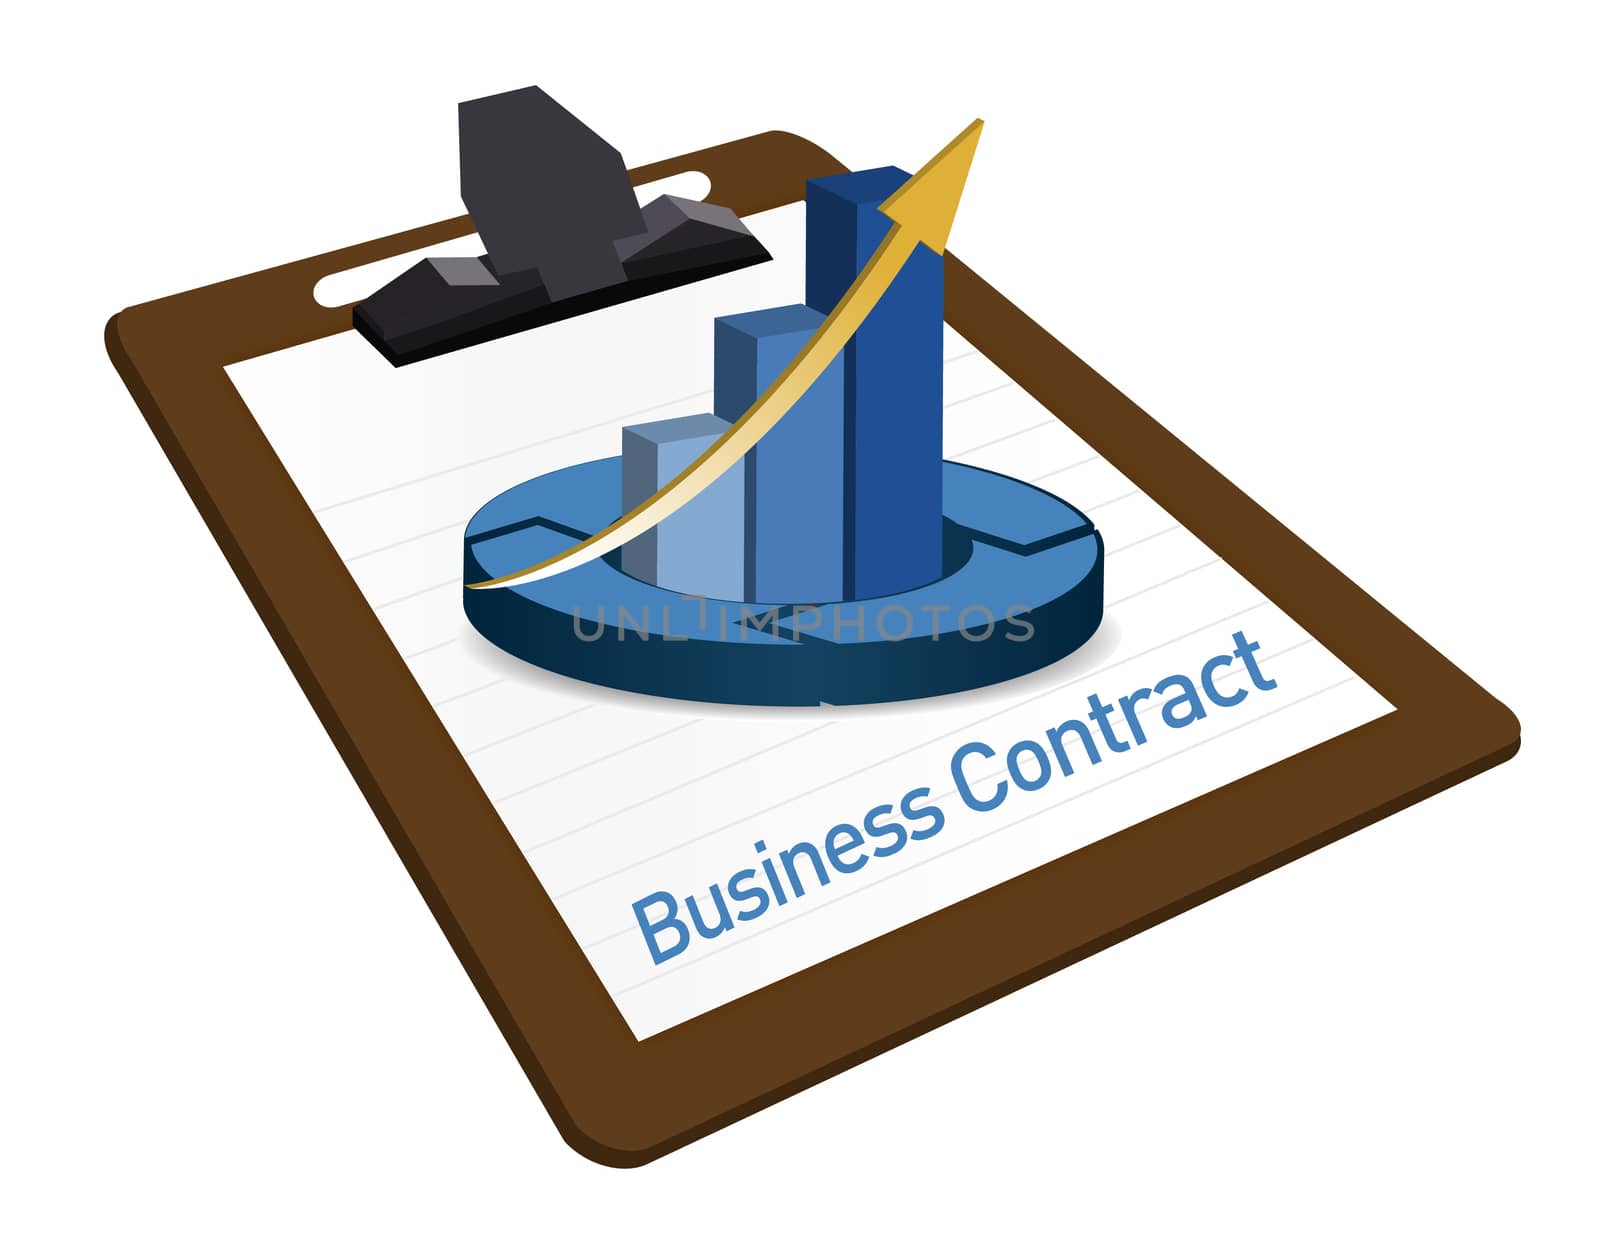 Business Contract documentation illustration by alexmillos